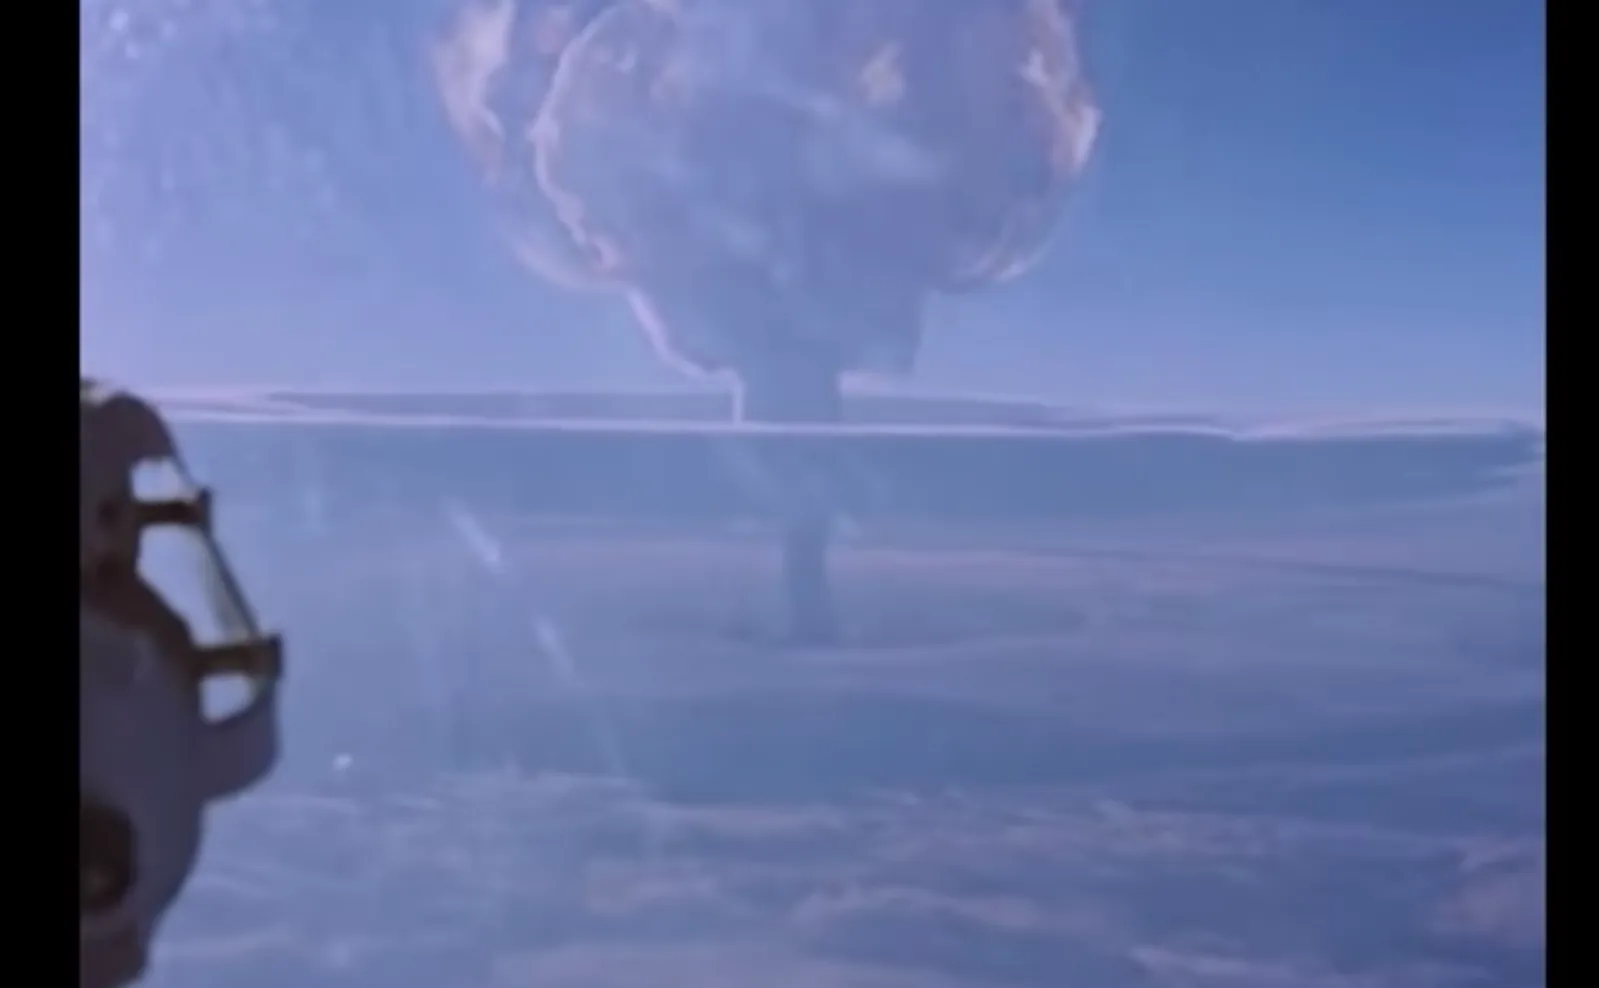 nuclear explosion in russia